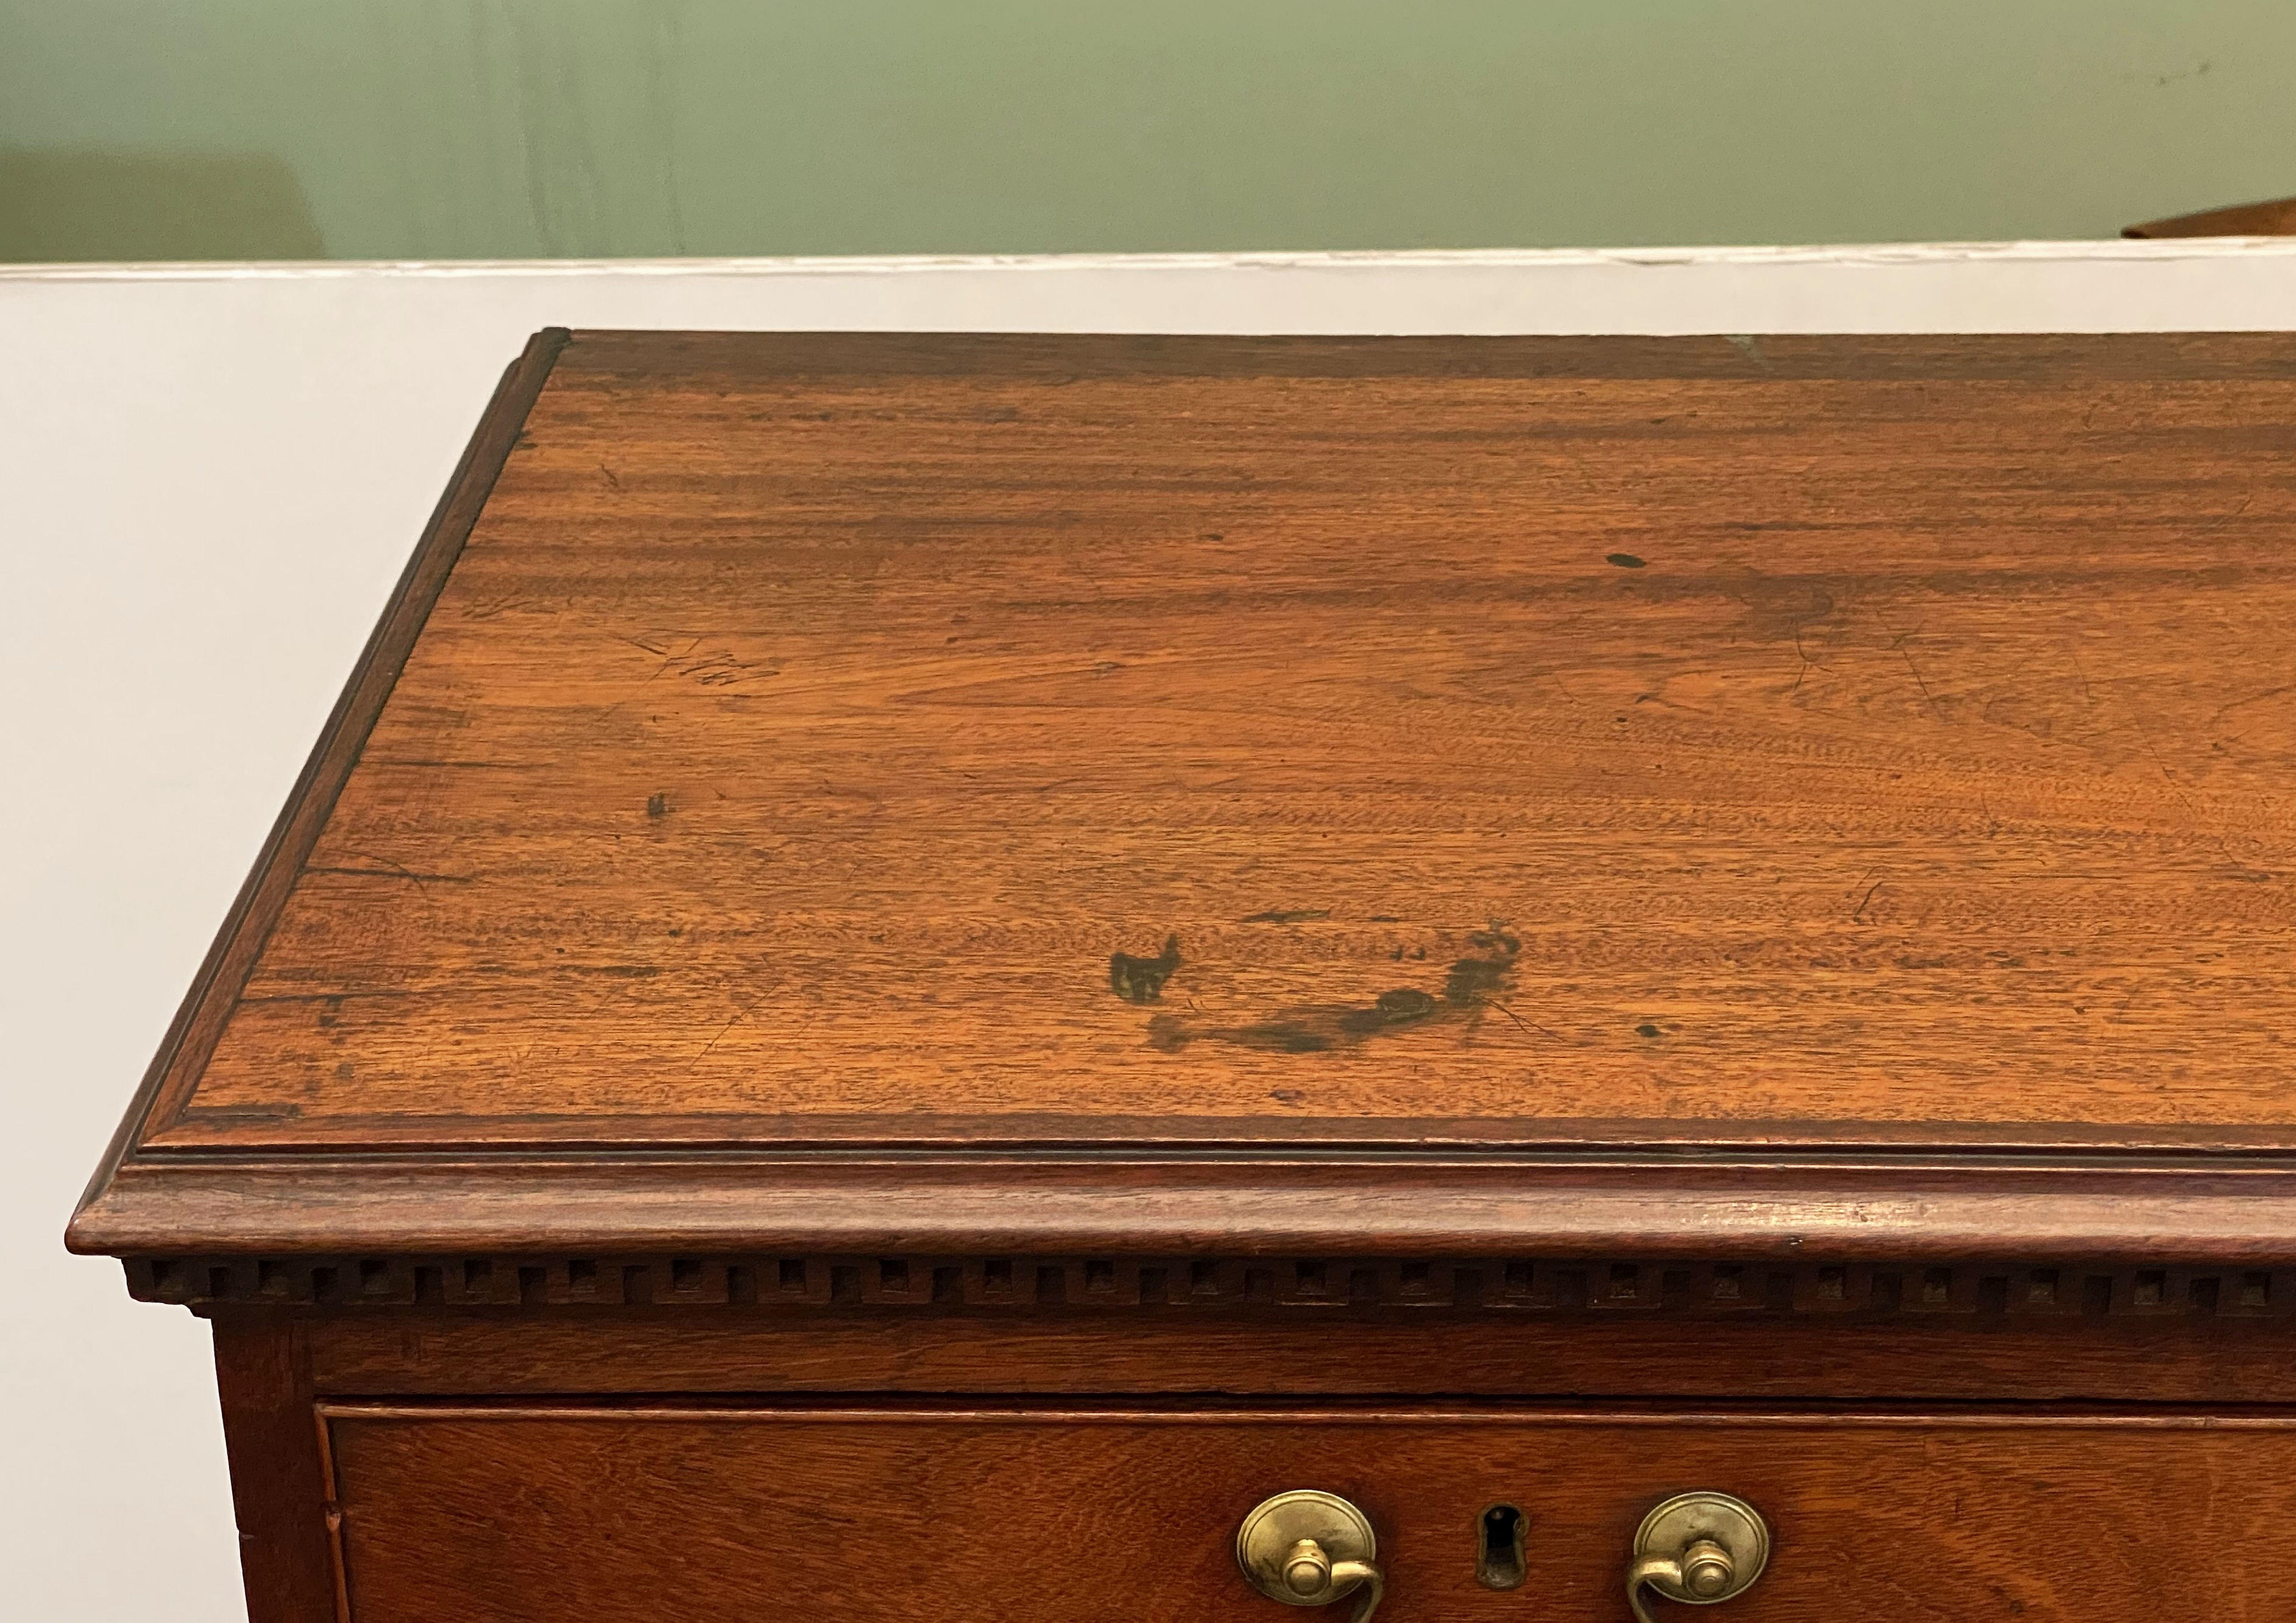 19th Century English Tall Chest or High Chest of Drawers from the Georgian Era